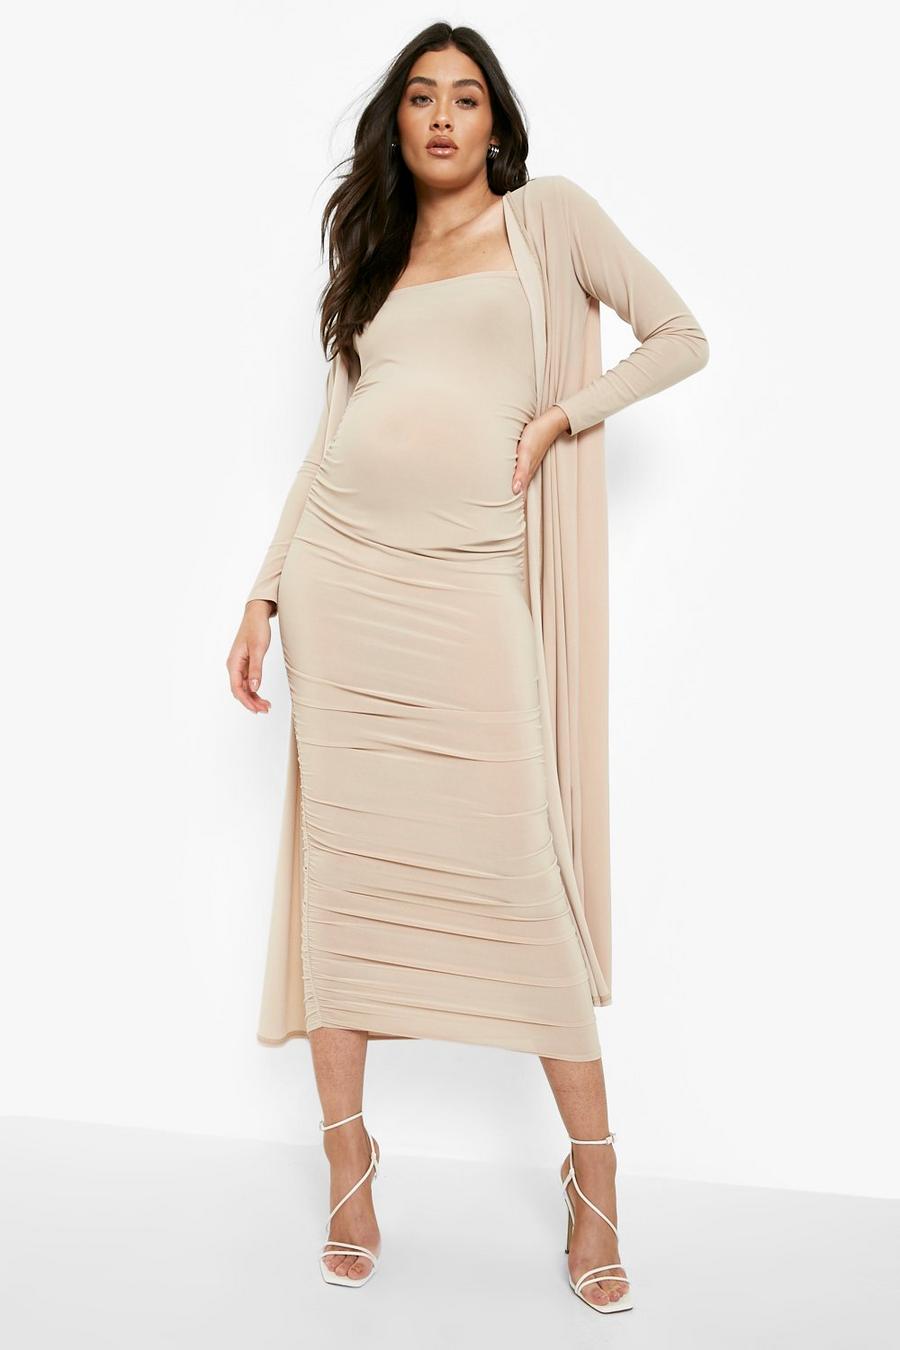 Stone beige Maternity Square Neck Ruched Duster Dress Set